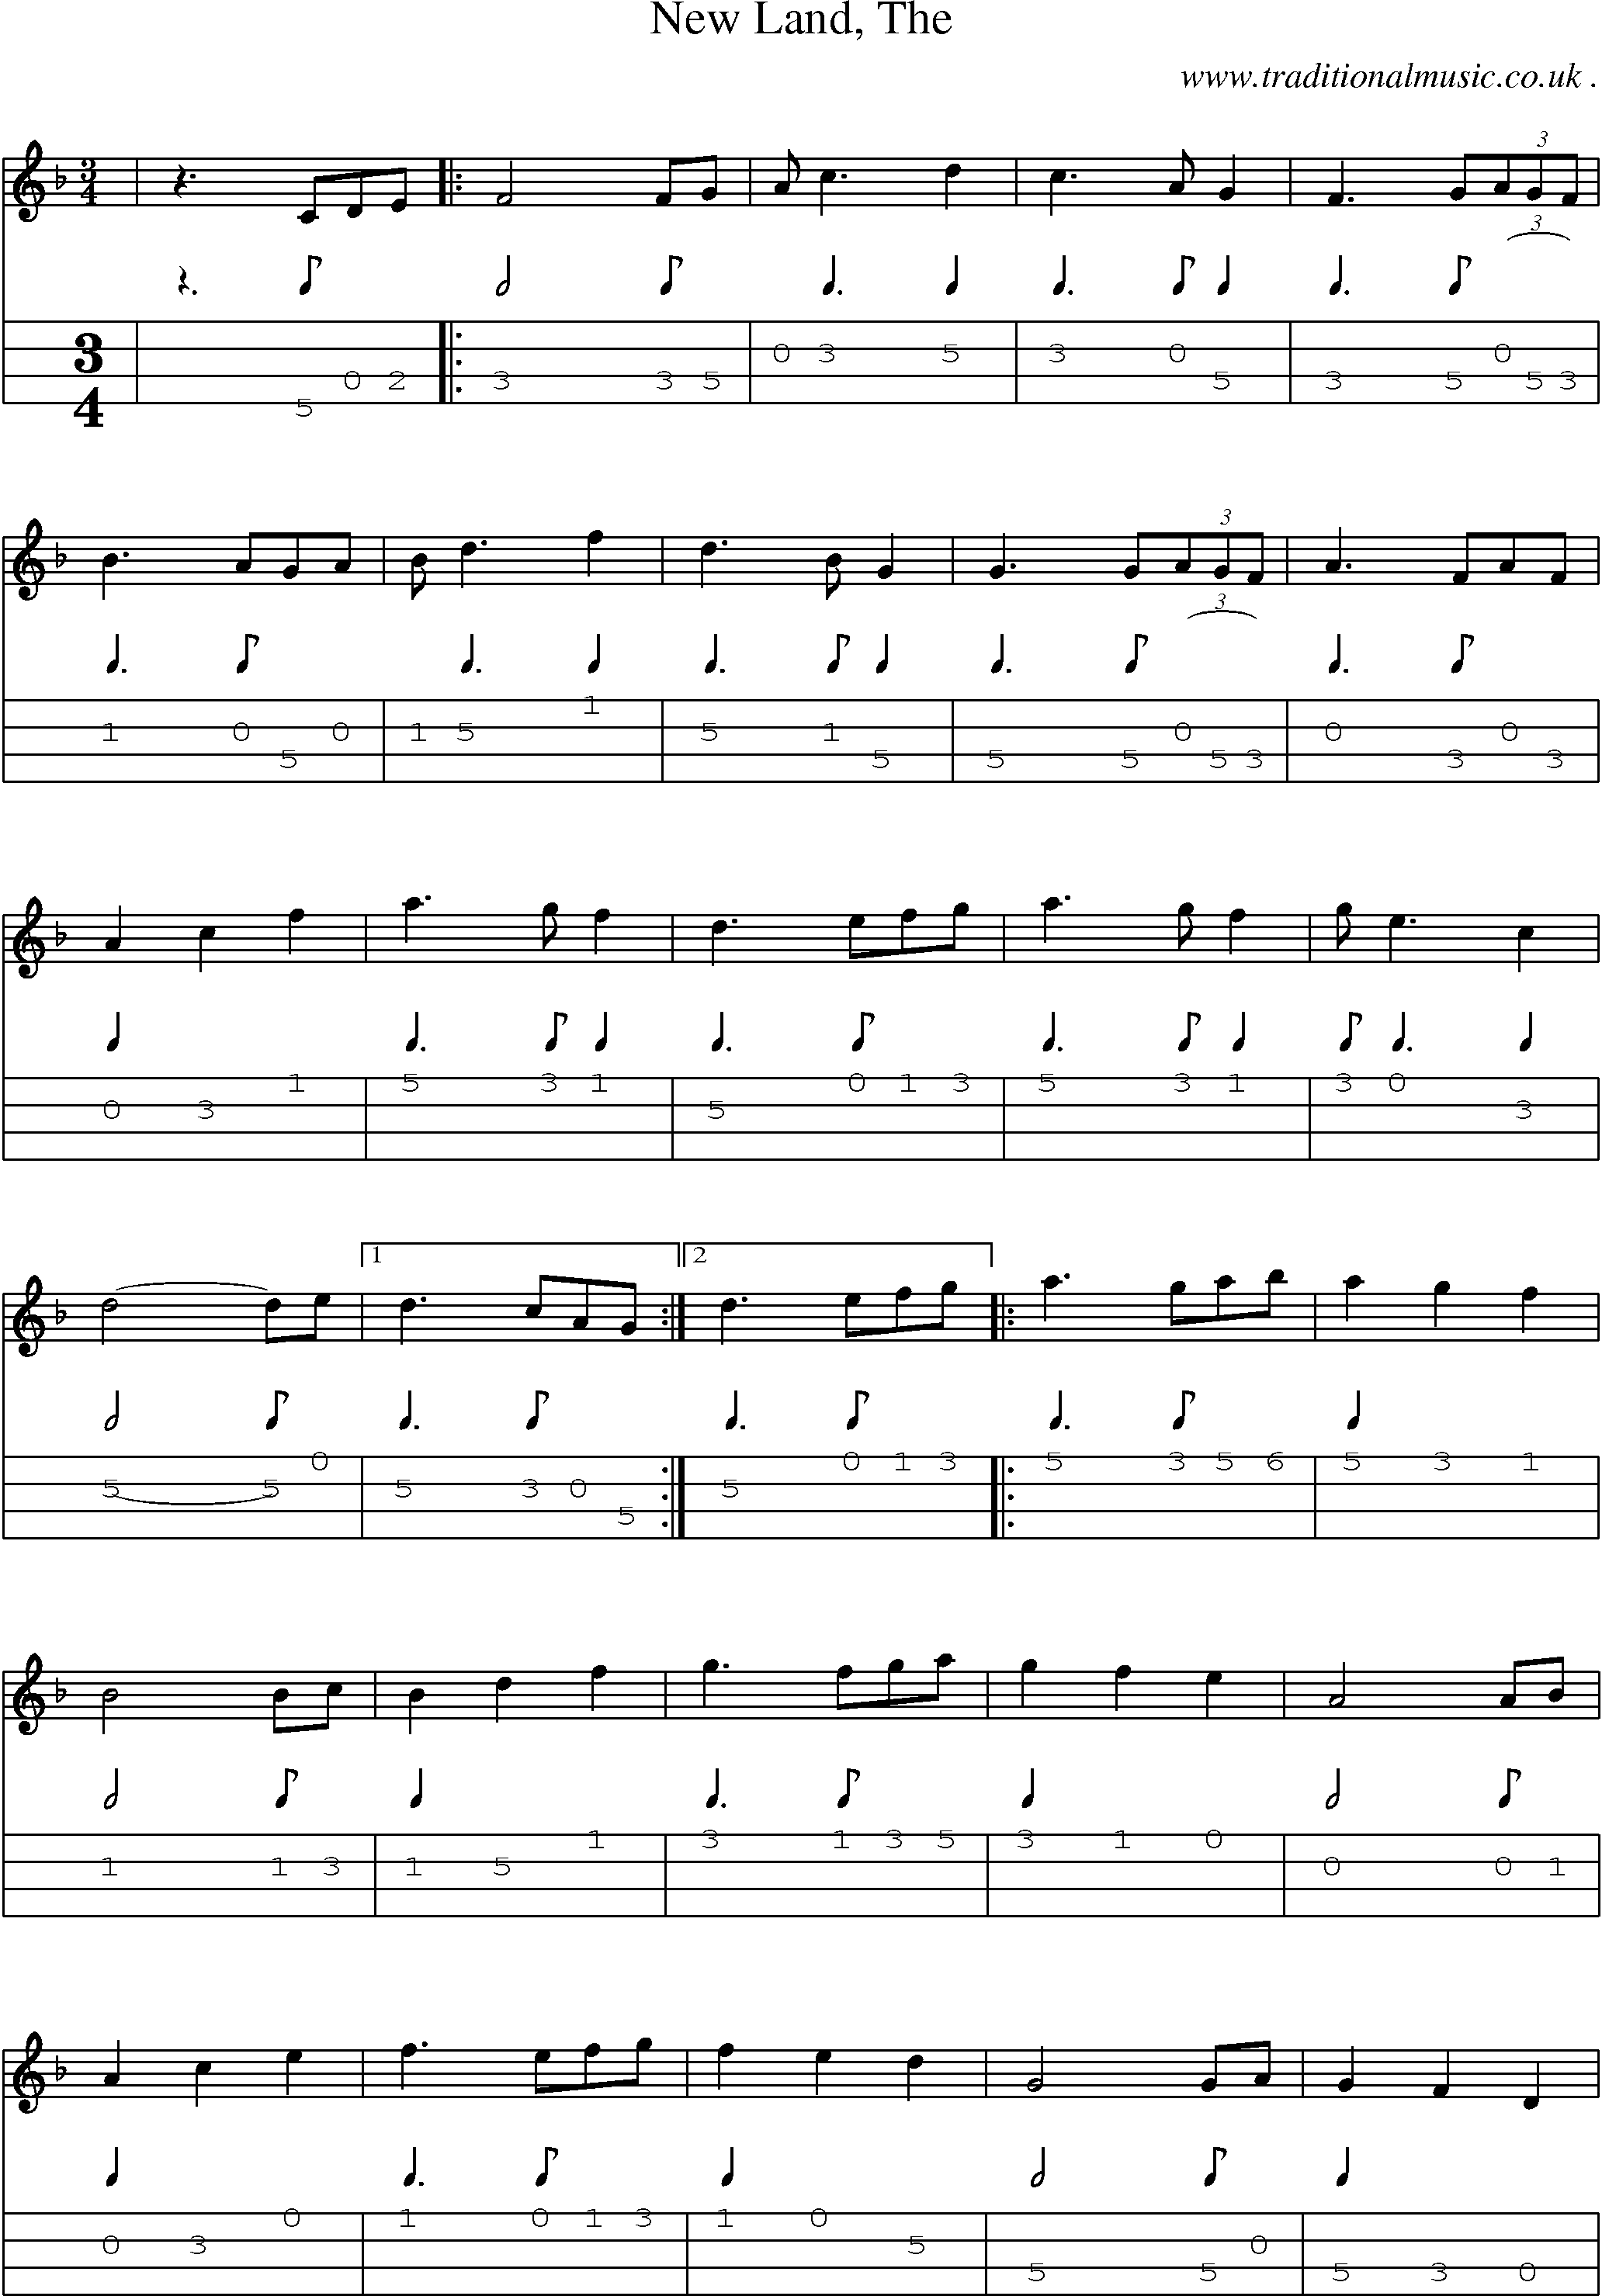 Music Score and Guitar Tabs for New Land The